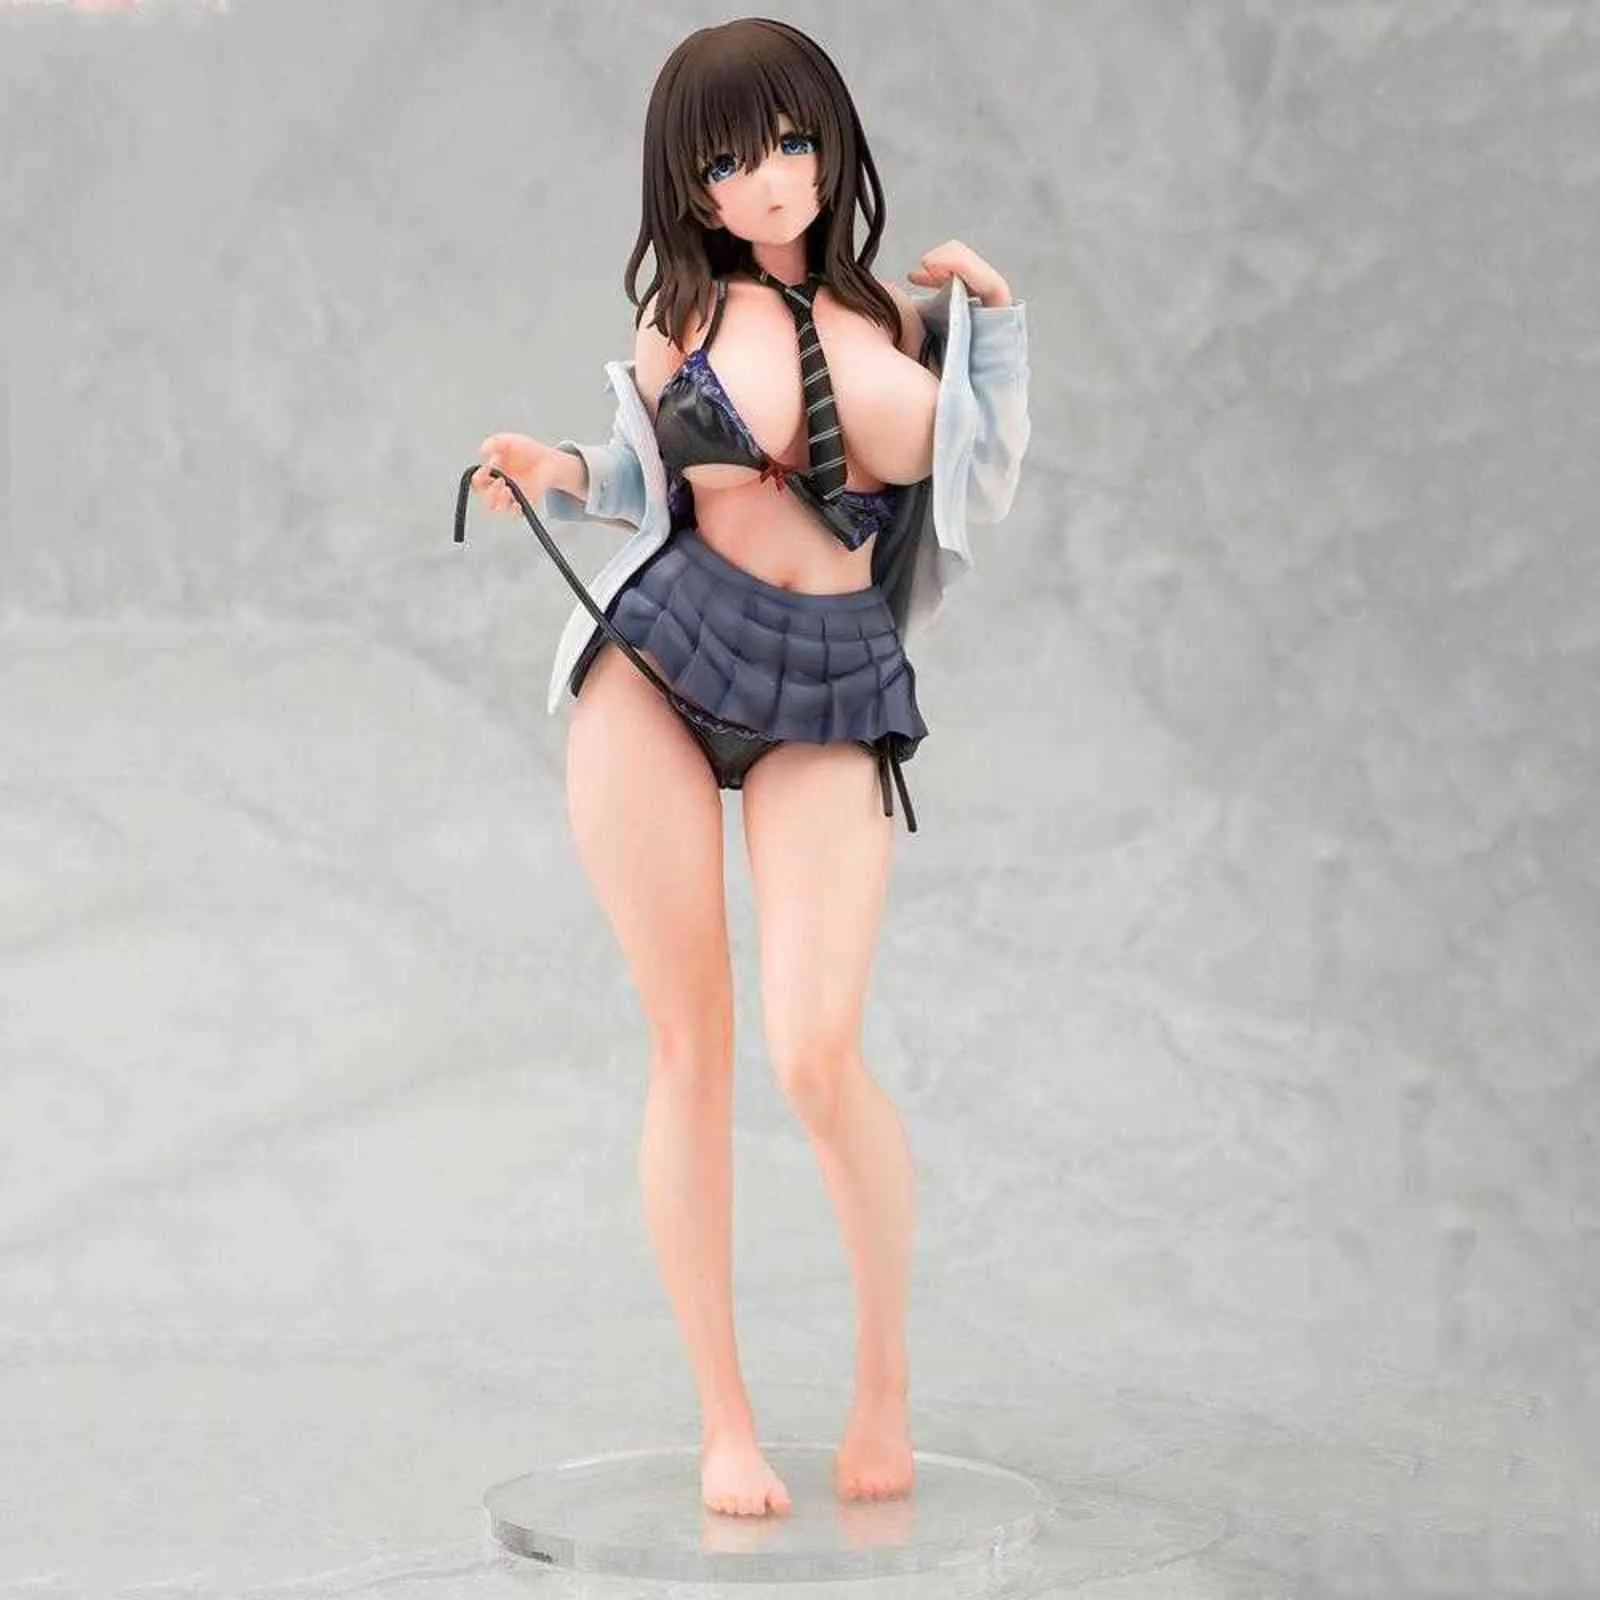 1/6 Scale Japan Anime DAIKI Mataro Wet JK Kuromine Aya PVC Action Figure Toy Adult Game Statue Collection Model Doll Gifts H1105